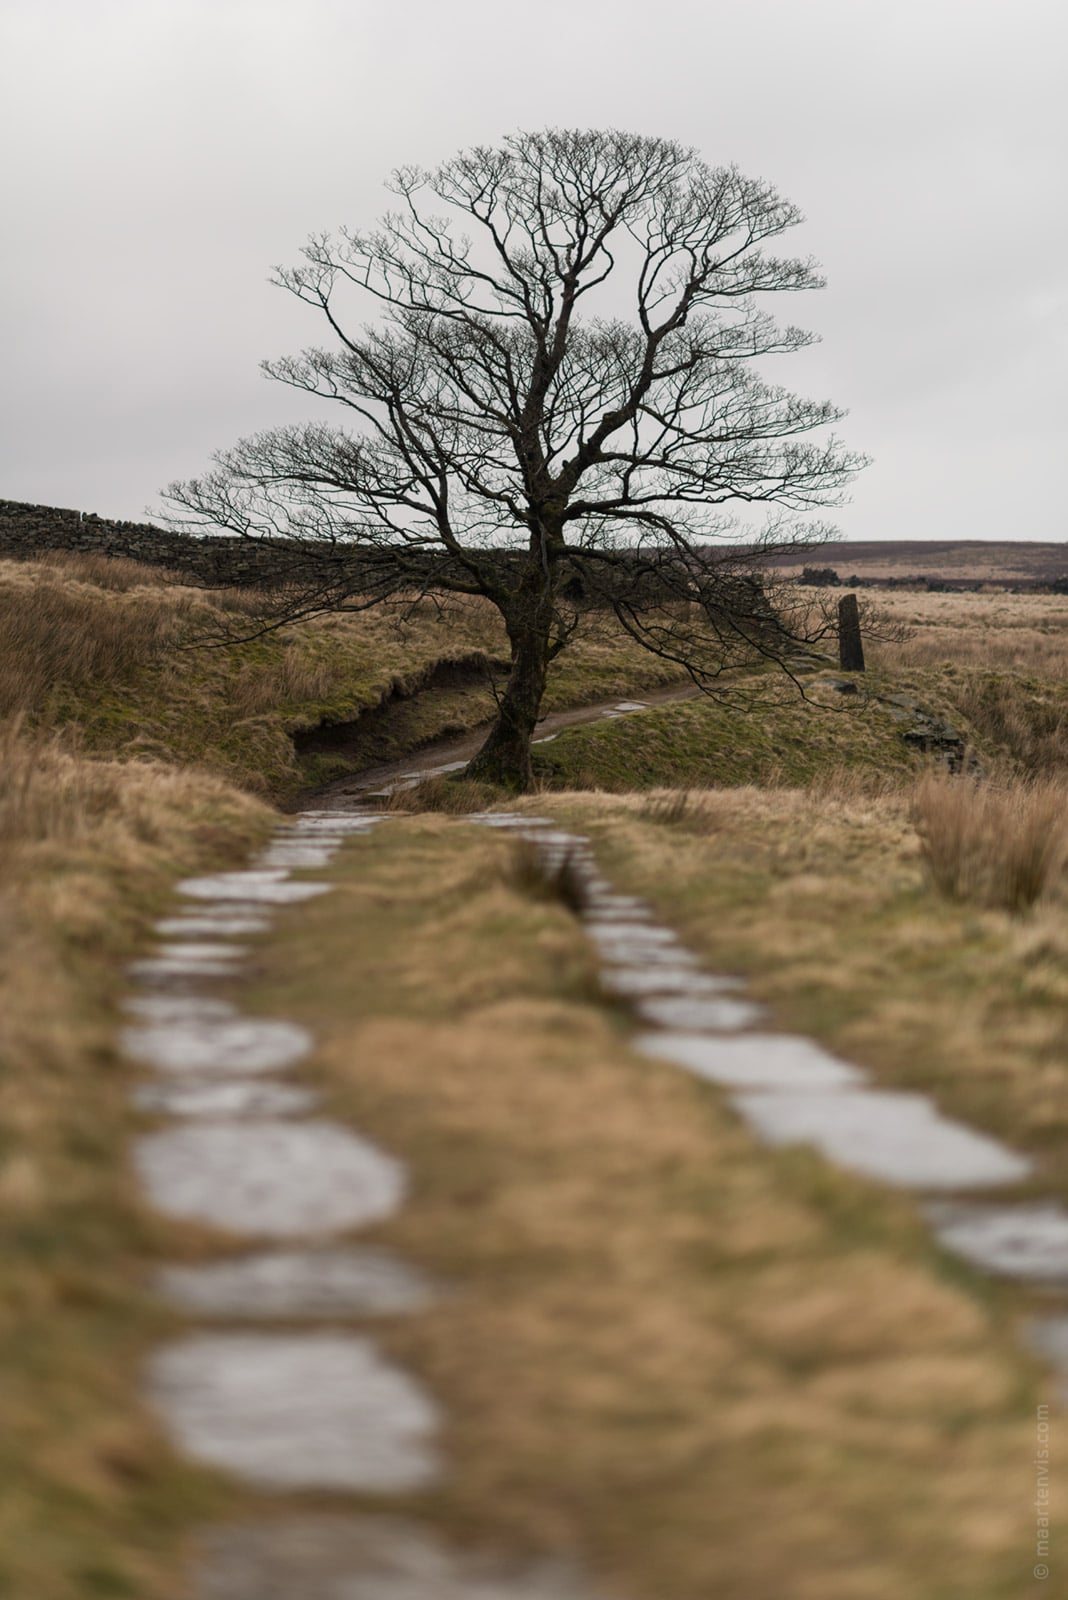 20160324 8125 - Hiking on the Moors with the Brontë sisters